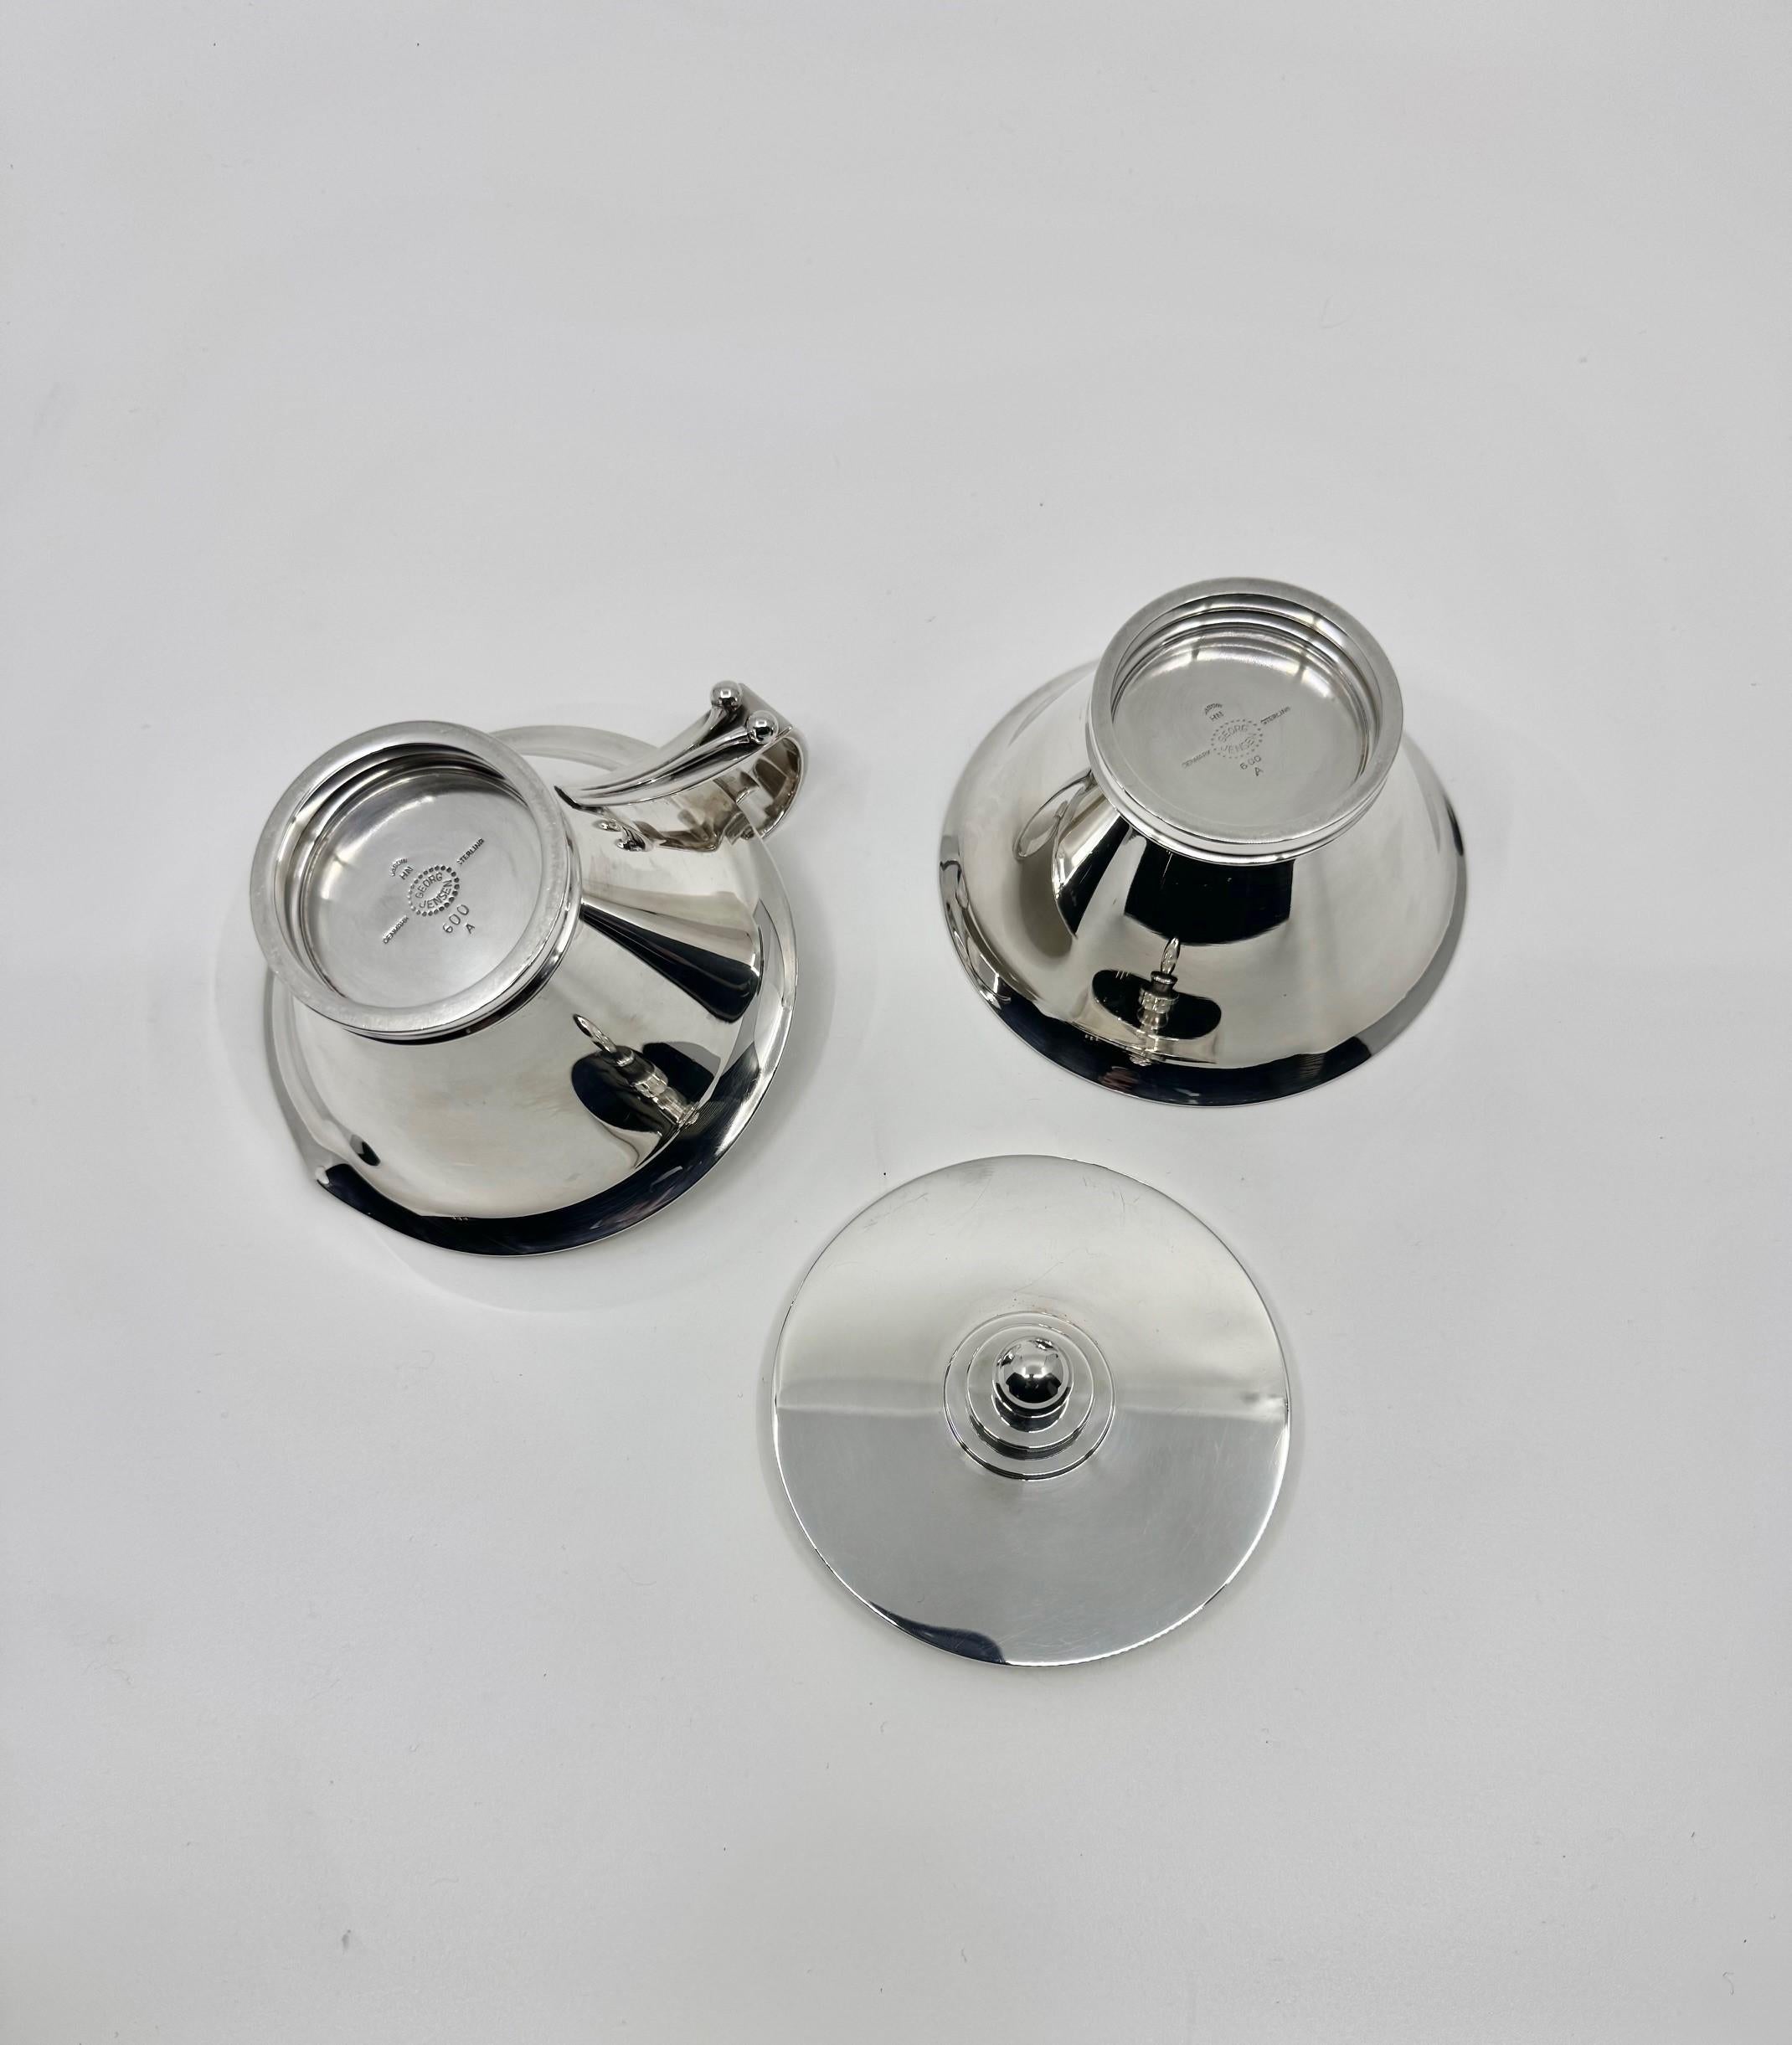 A vintage two-piece sterling silver creamer and sugar set from Georg Jensen, featuring the Pyramid pattern, design #600A by Harald Nielsen from 1930. The Art Deco-inspired design showcases a conical-shaped creamer with a round base and a beveled